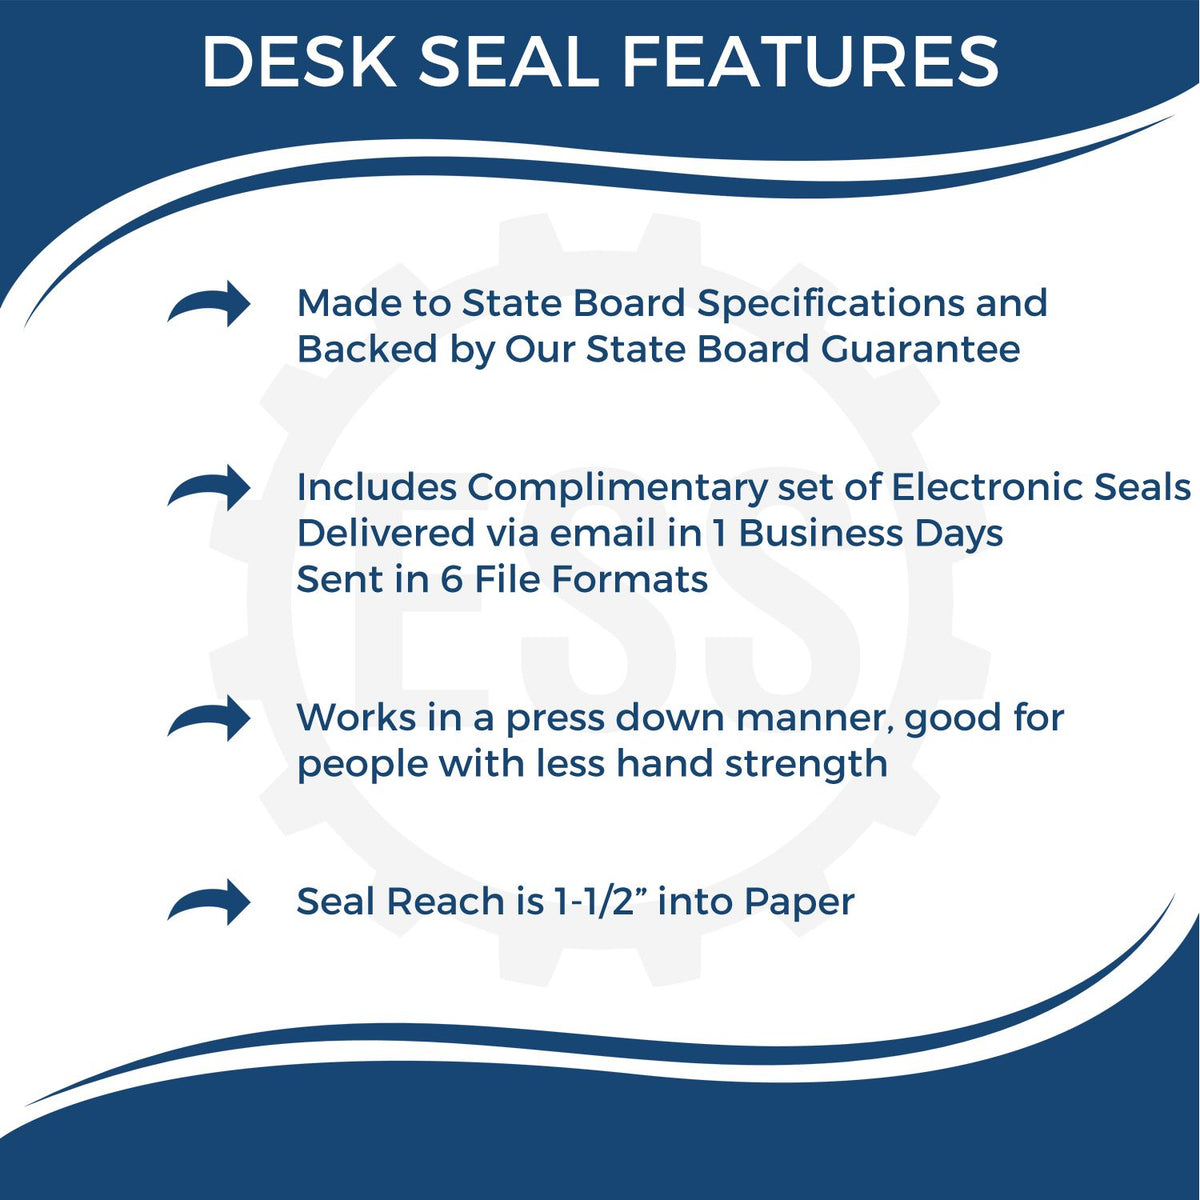 A picture of an infographic highlighting the selling points for the New Jersey Desk Architect Embossing Seal